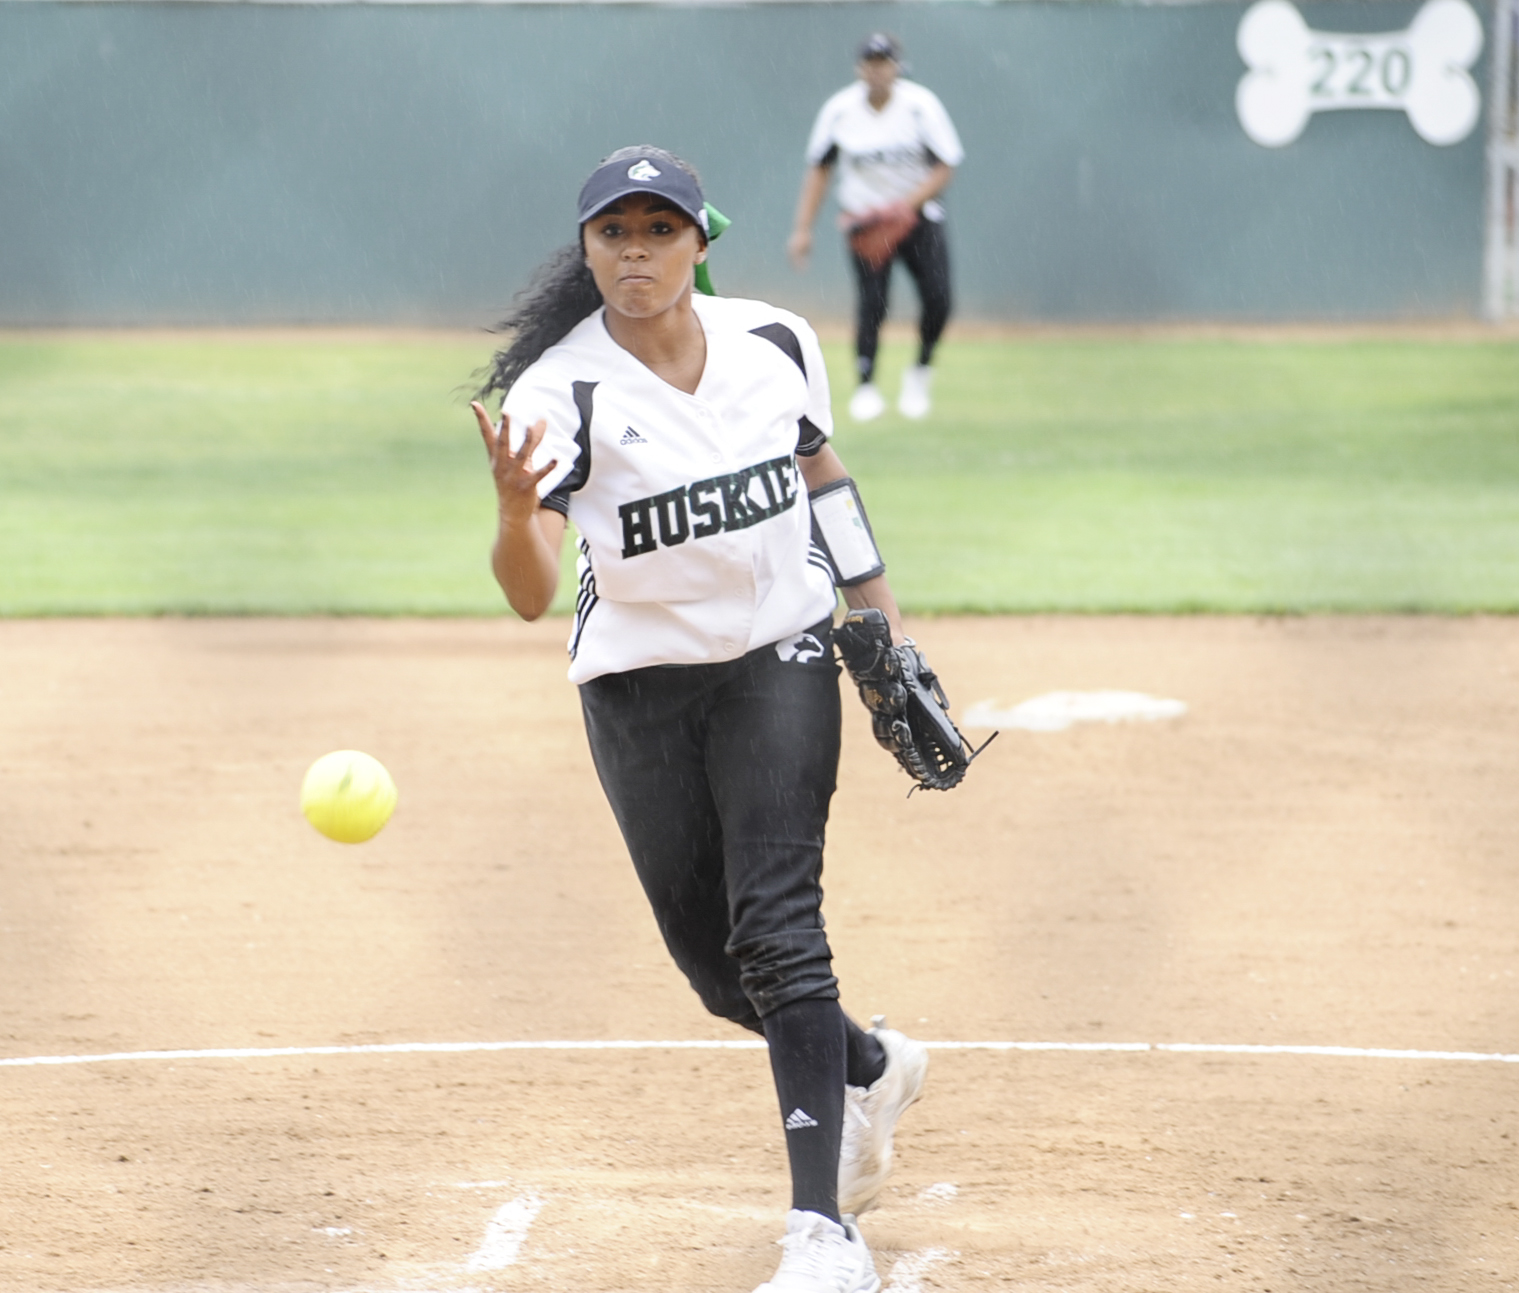 One out away from a loss, the Huskies softball team shocked Chaffey College 10-7 scoring seven runs in the top of the seventh inning. Majisty Shomo (pictured) threw a strike out and winning pitcher Angelita Villalvazo threw two. (Photo by Tadzio Garcia)